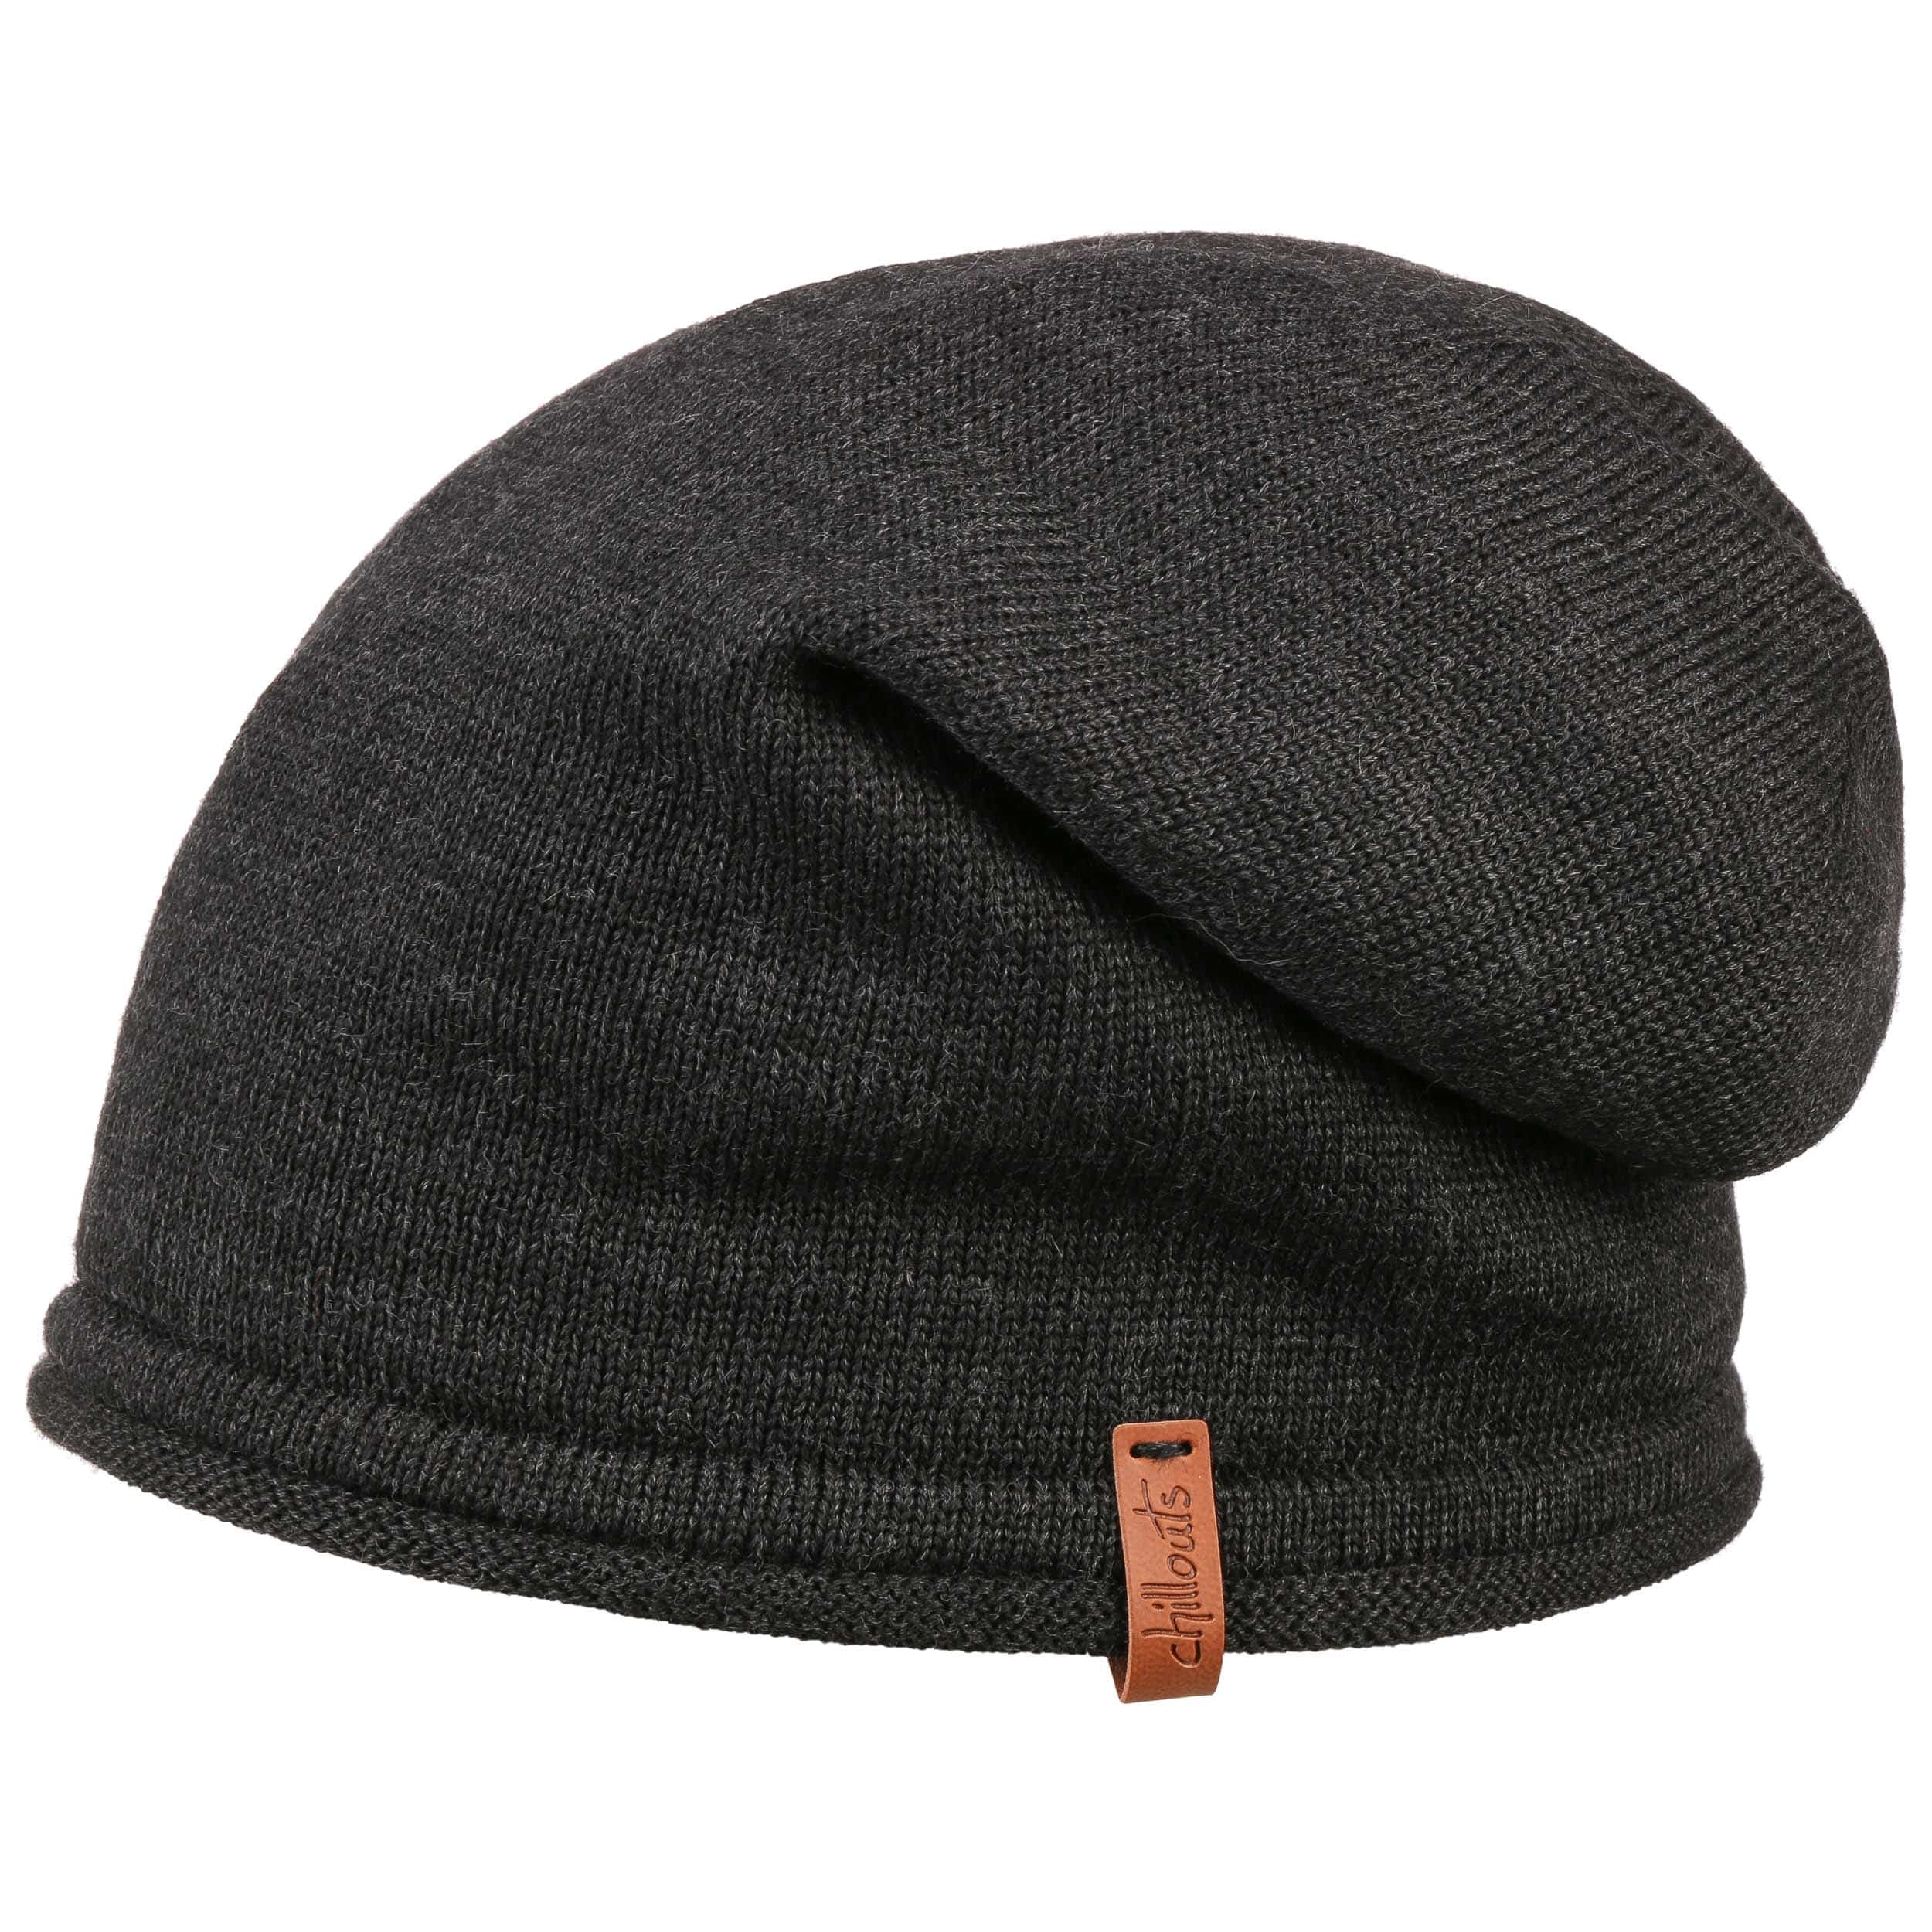 Leicester Oversize Beanie by 29,95 Chillouts - €